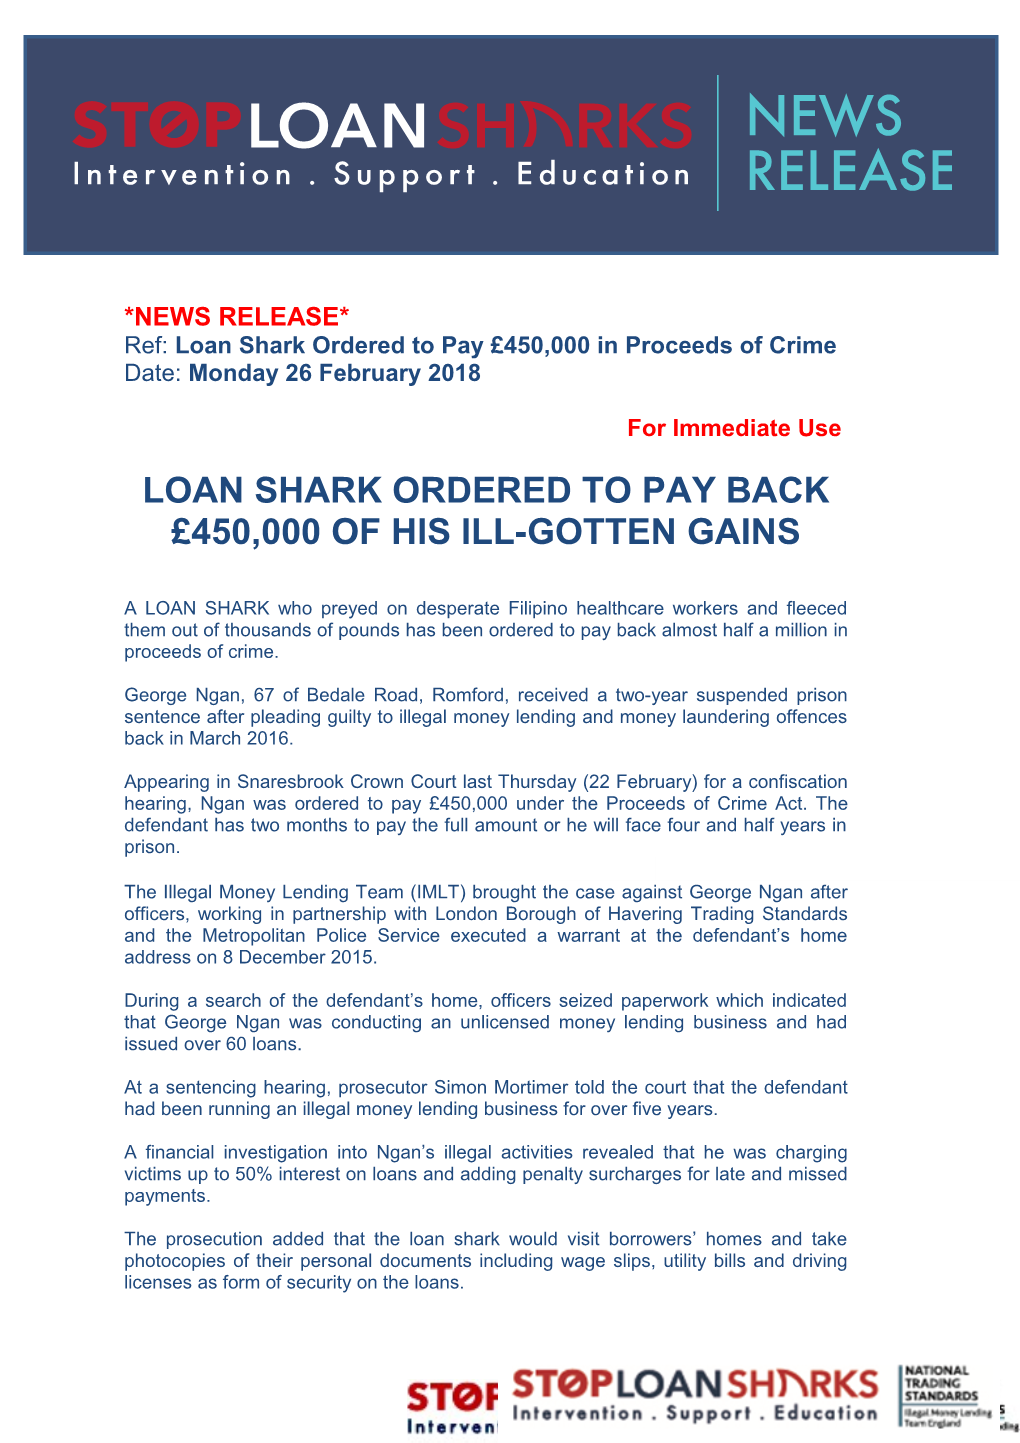 Ref: Loan Shark Ordered to Pay 450,000 in Proceeds of Crime